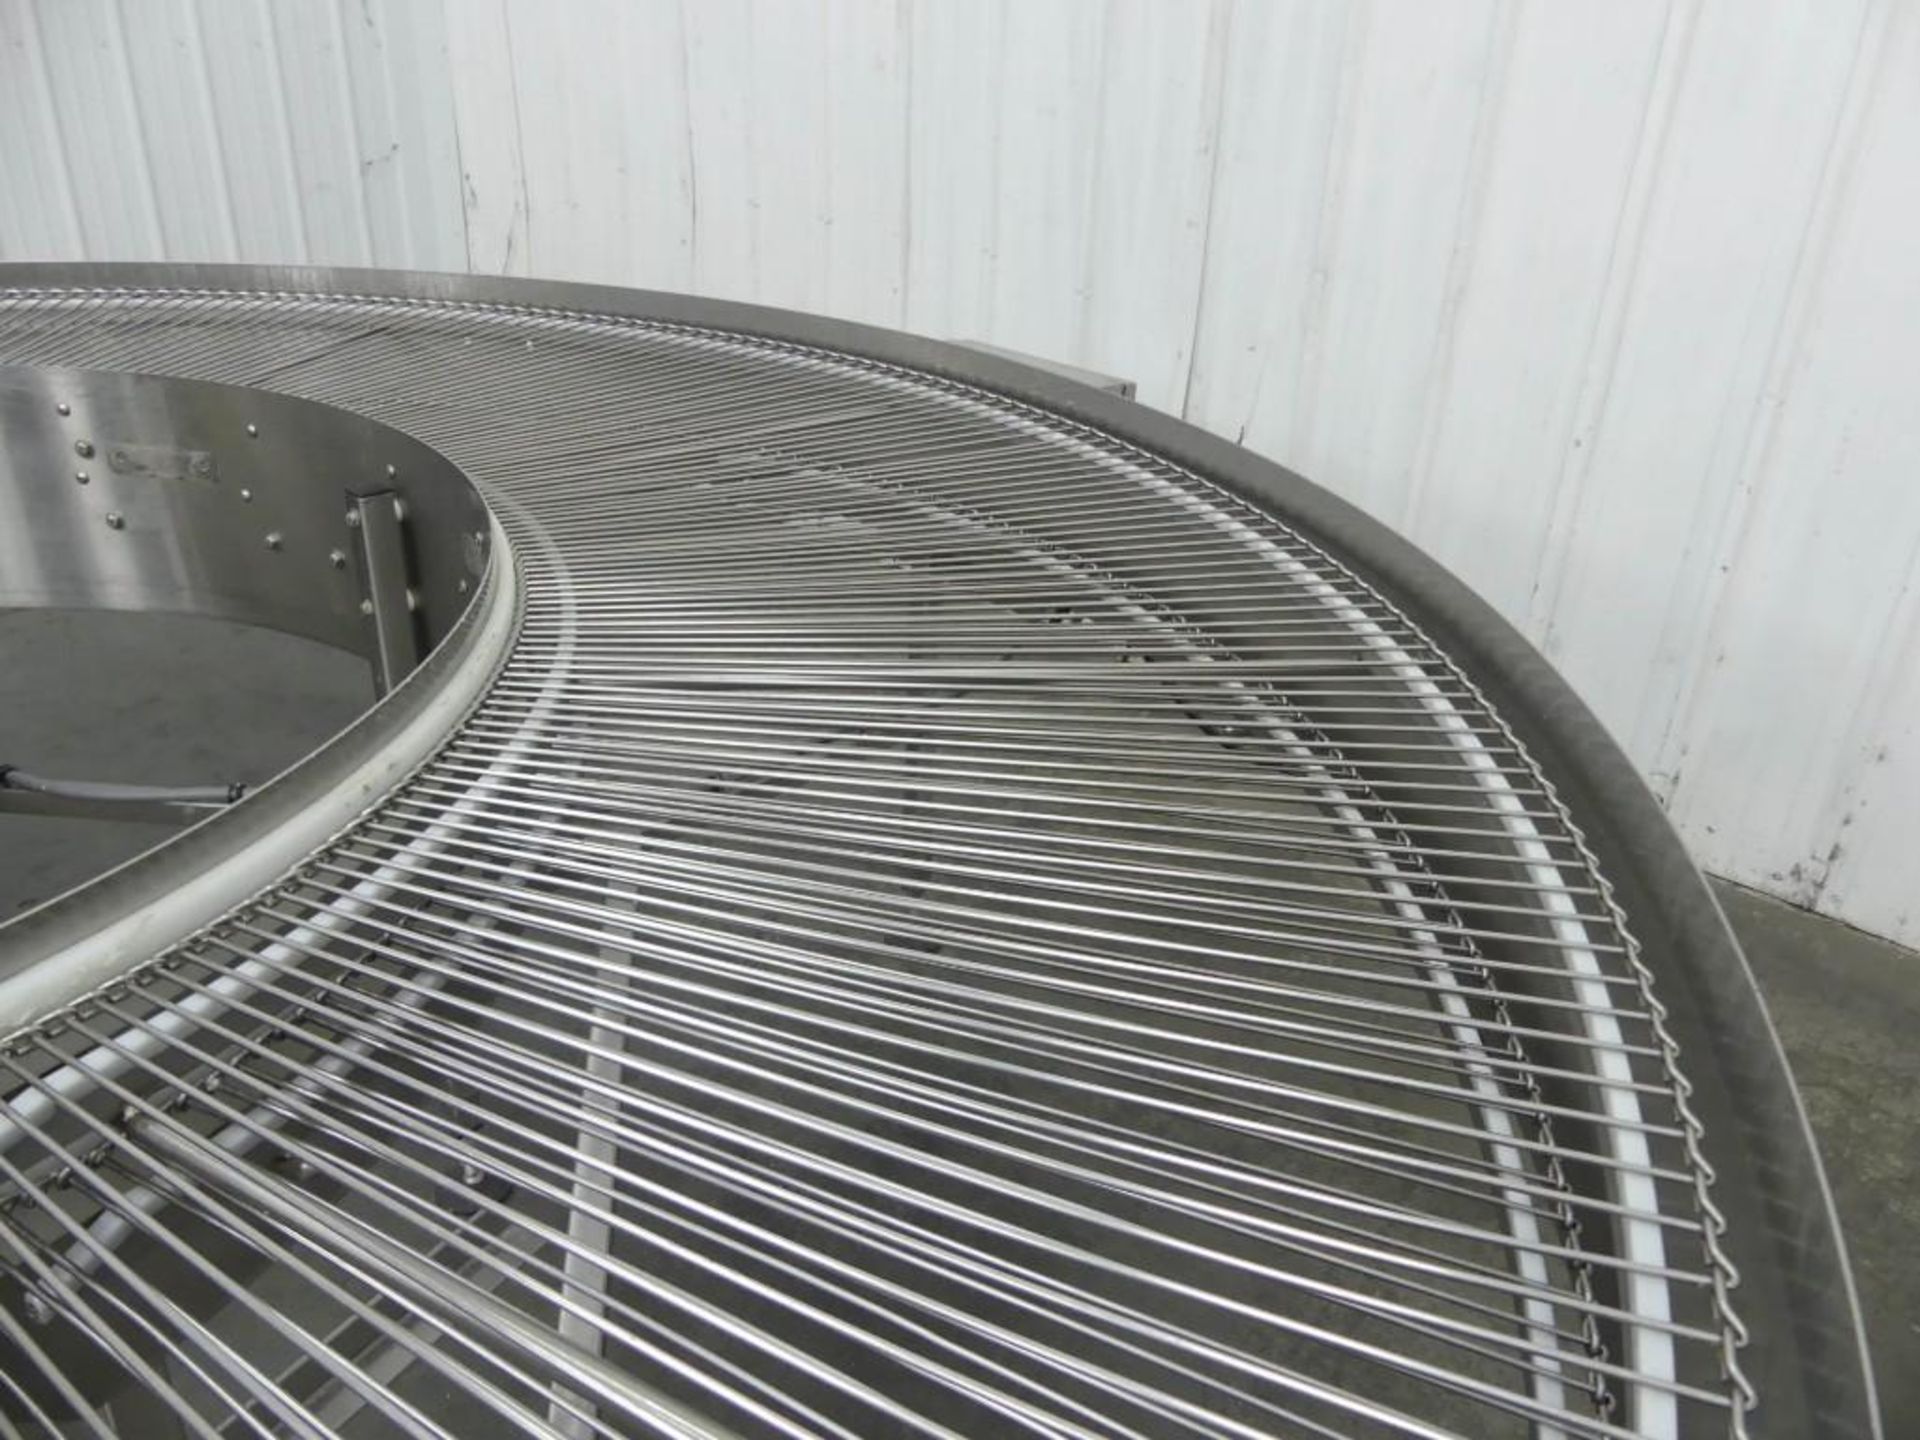 Belshaw 180DC LH Wire Conveyor 180 Degree Turn - Image 5 of 8